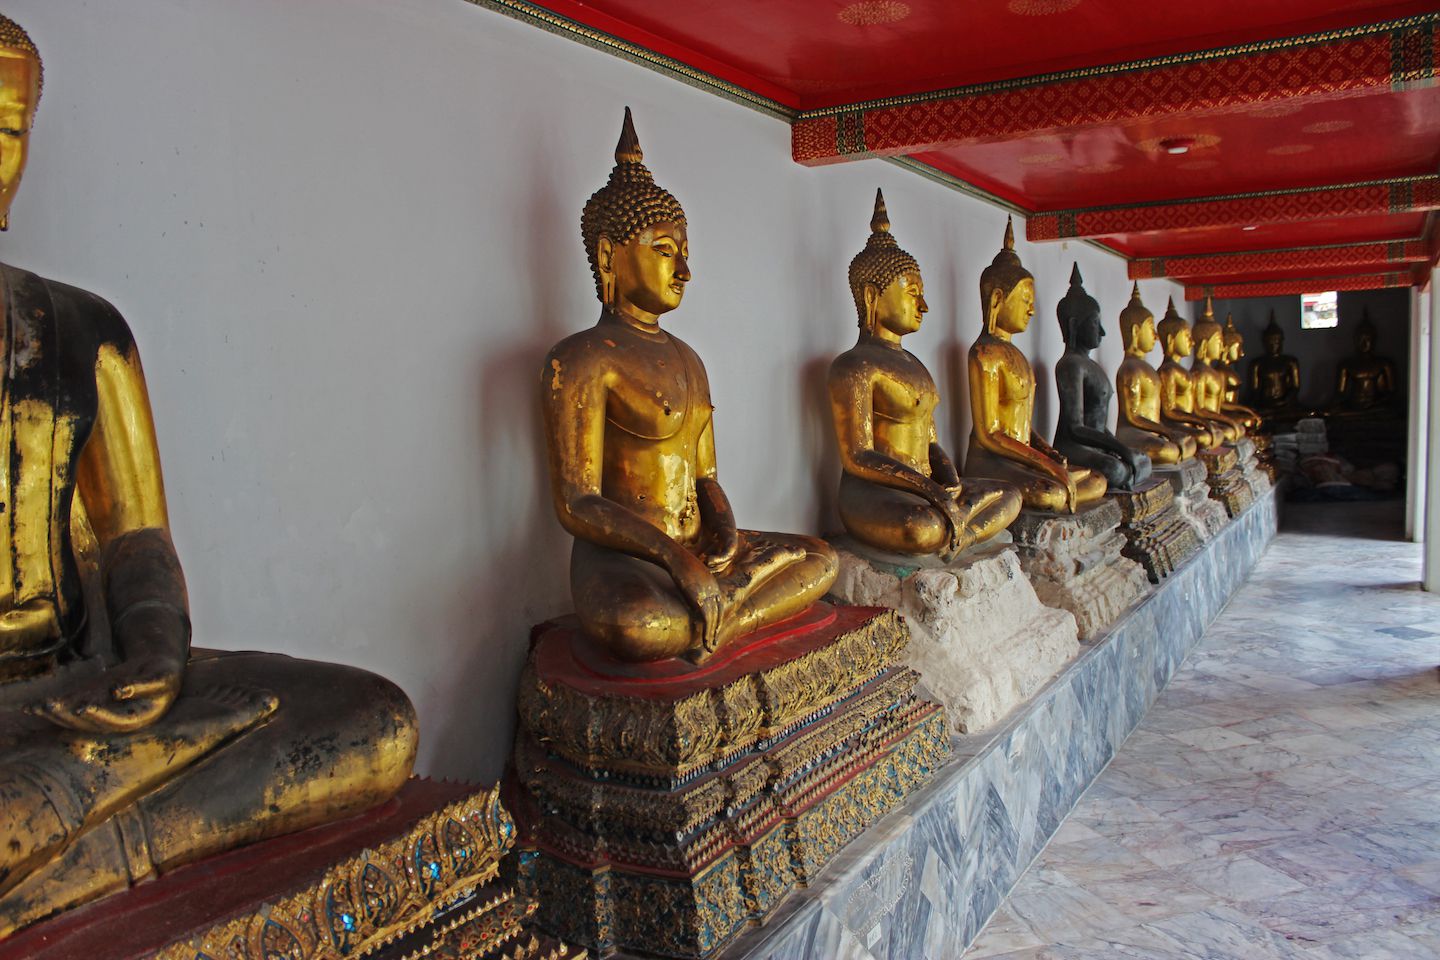 Line of Buddha statues at Wat Pho